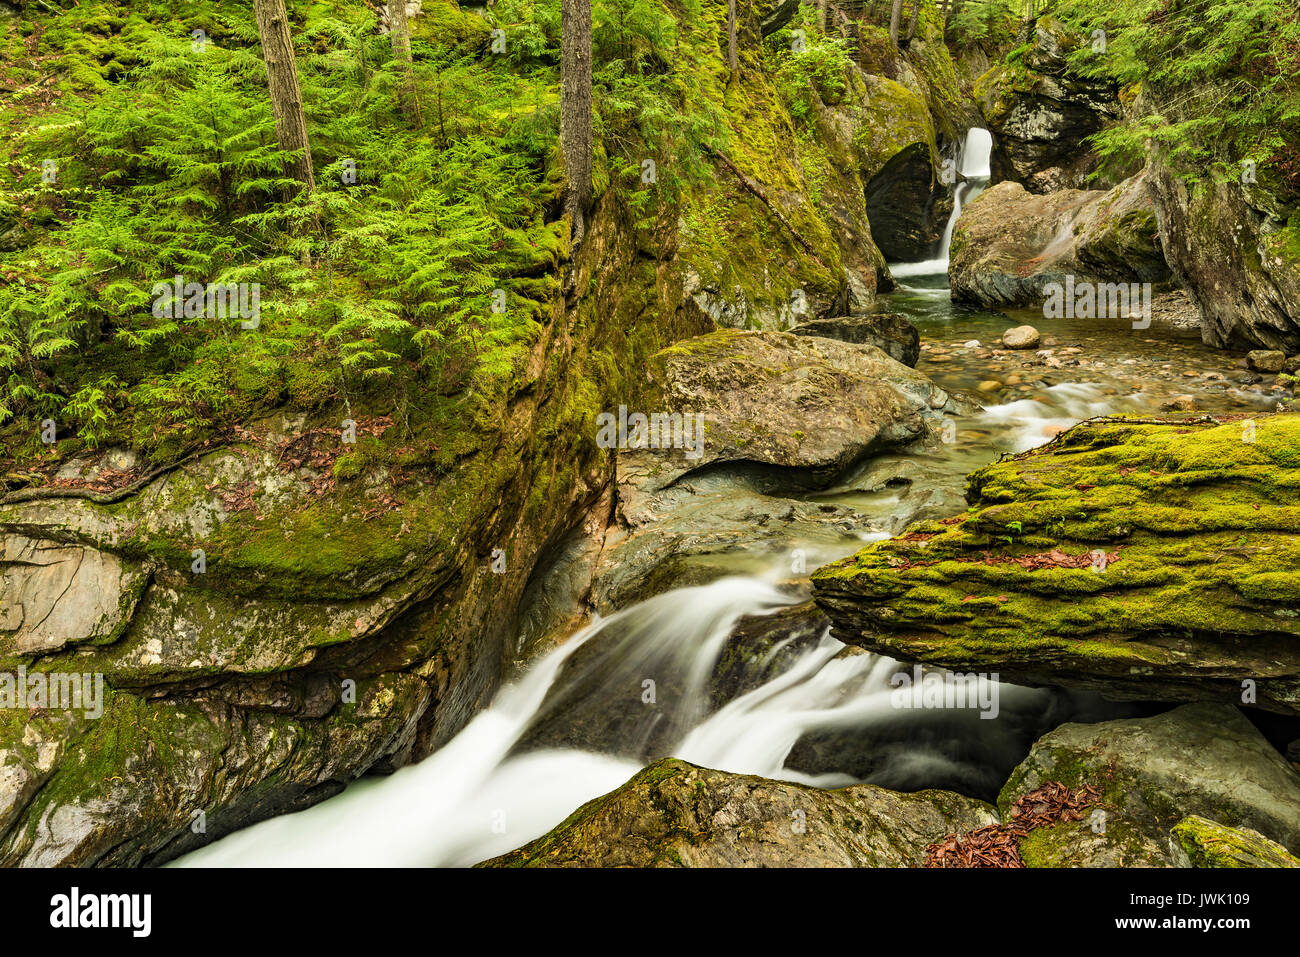 Texas Falls and Texas Brook flowing through the Green Mountain National Forest, Addison Co., VT Stock Photo